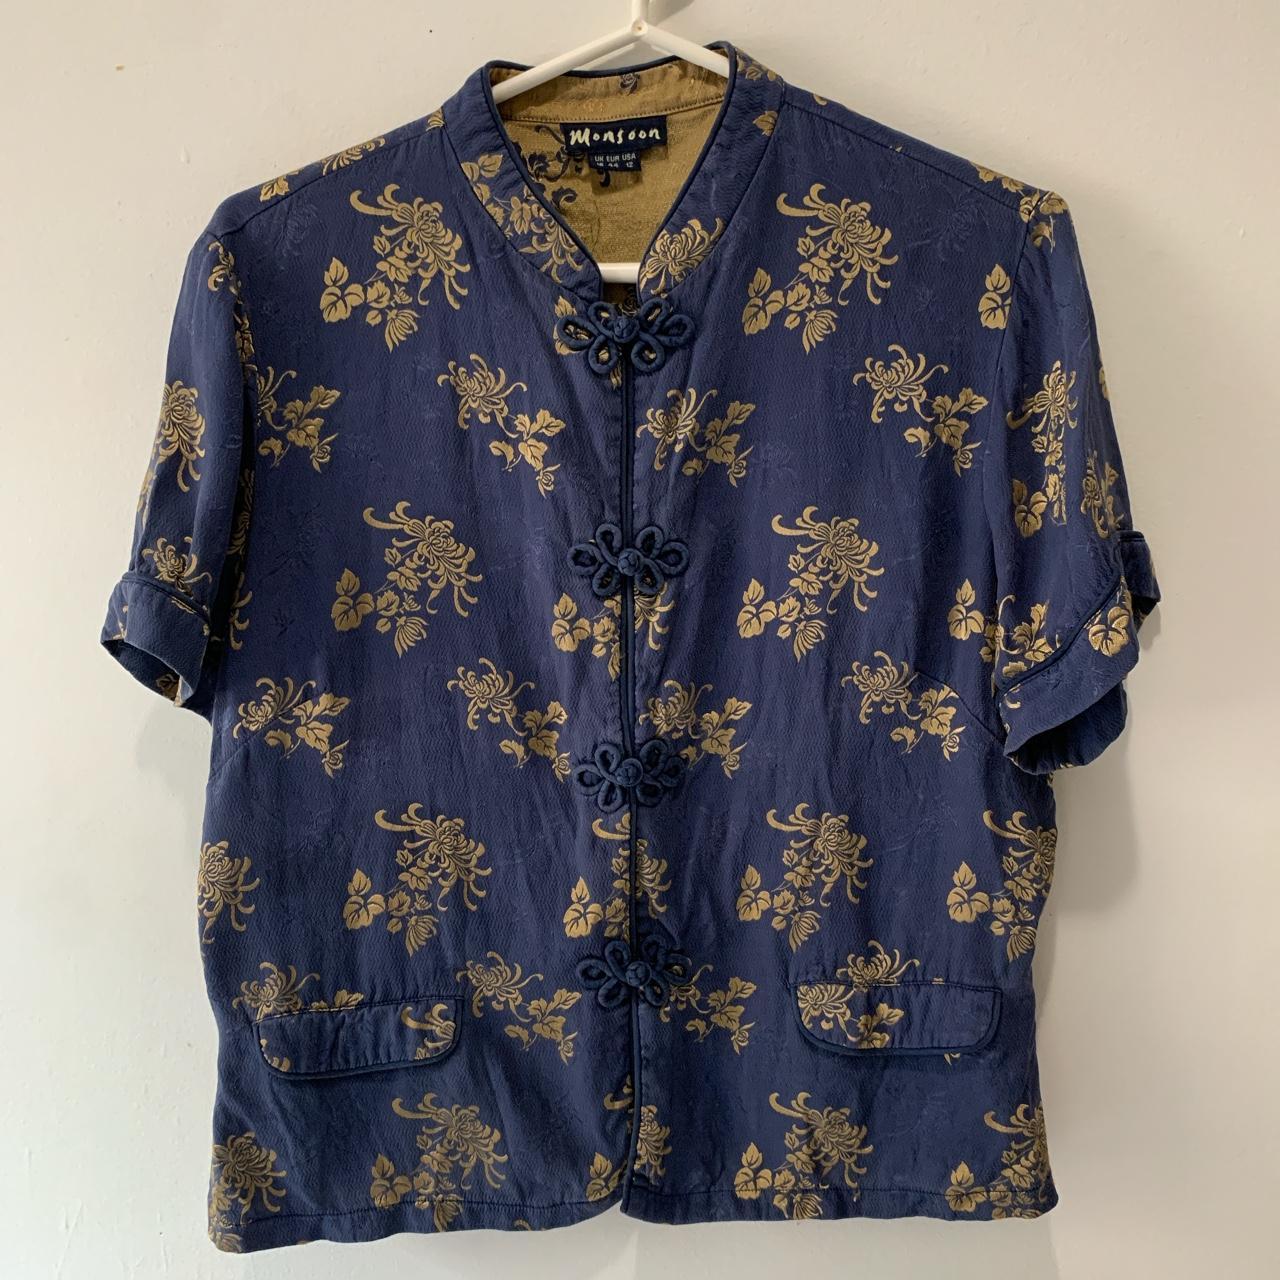 Monsoon Women's Navy and Gold Blouse | Depop